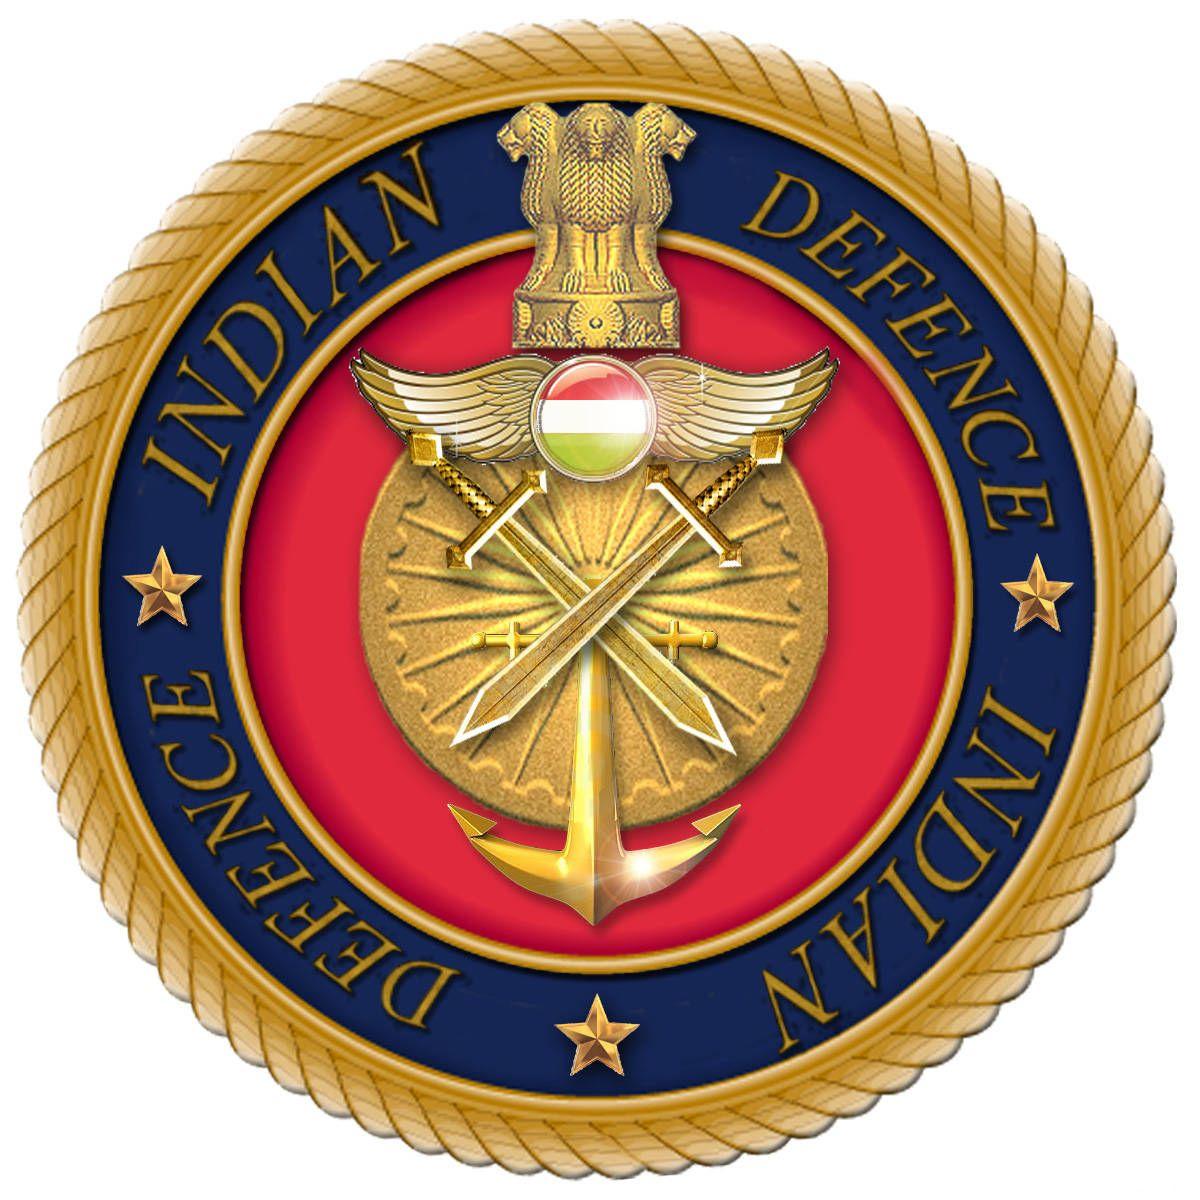 Free Indian Army Logo, Download Free Clip Art, Free Clip Art